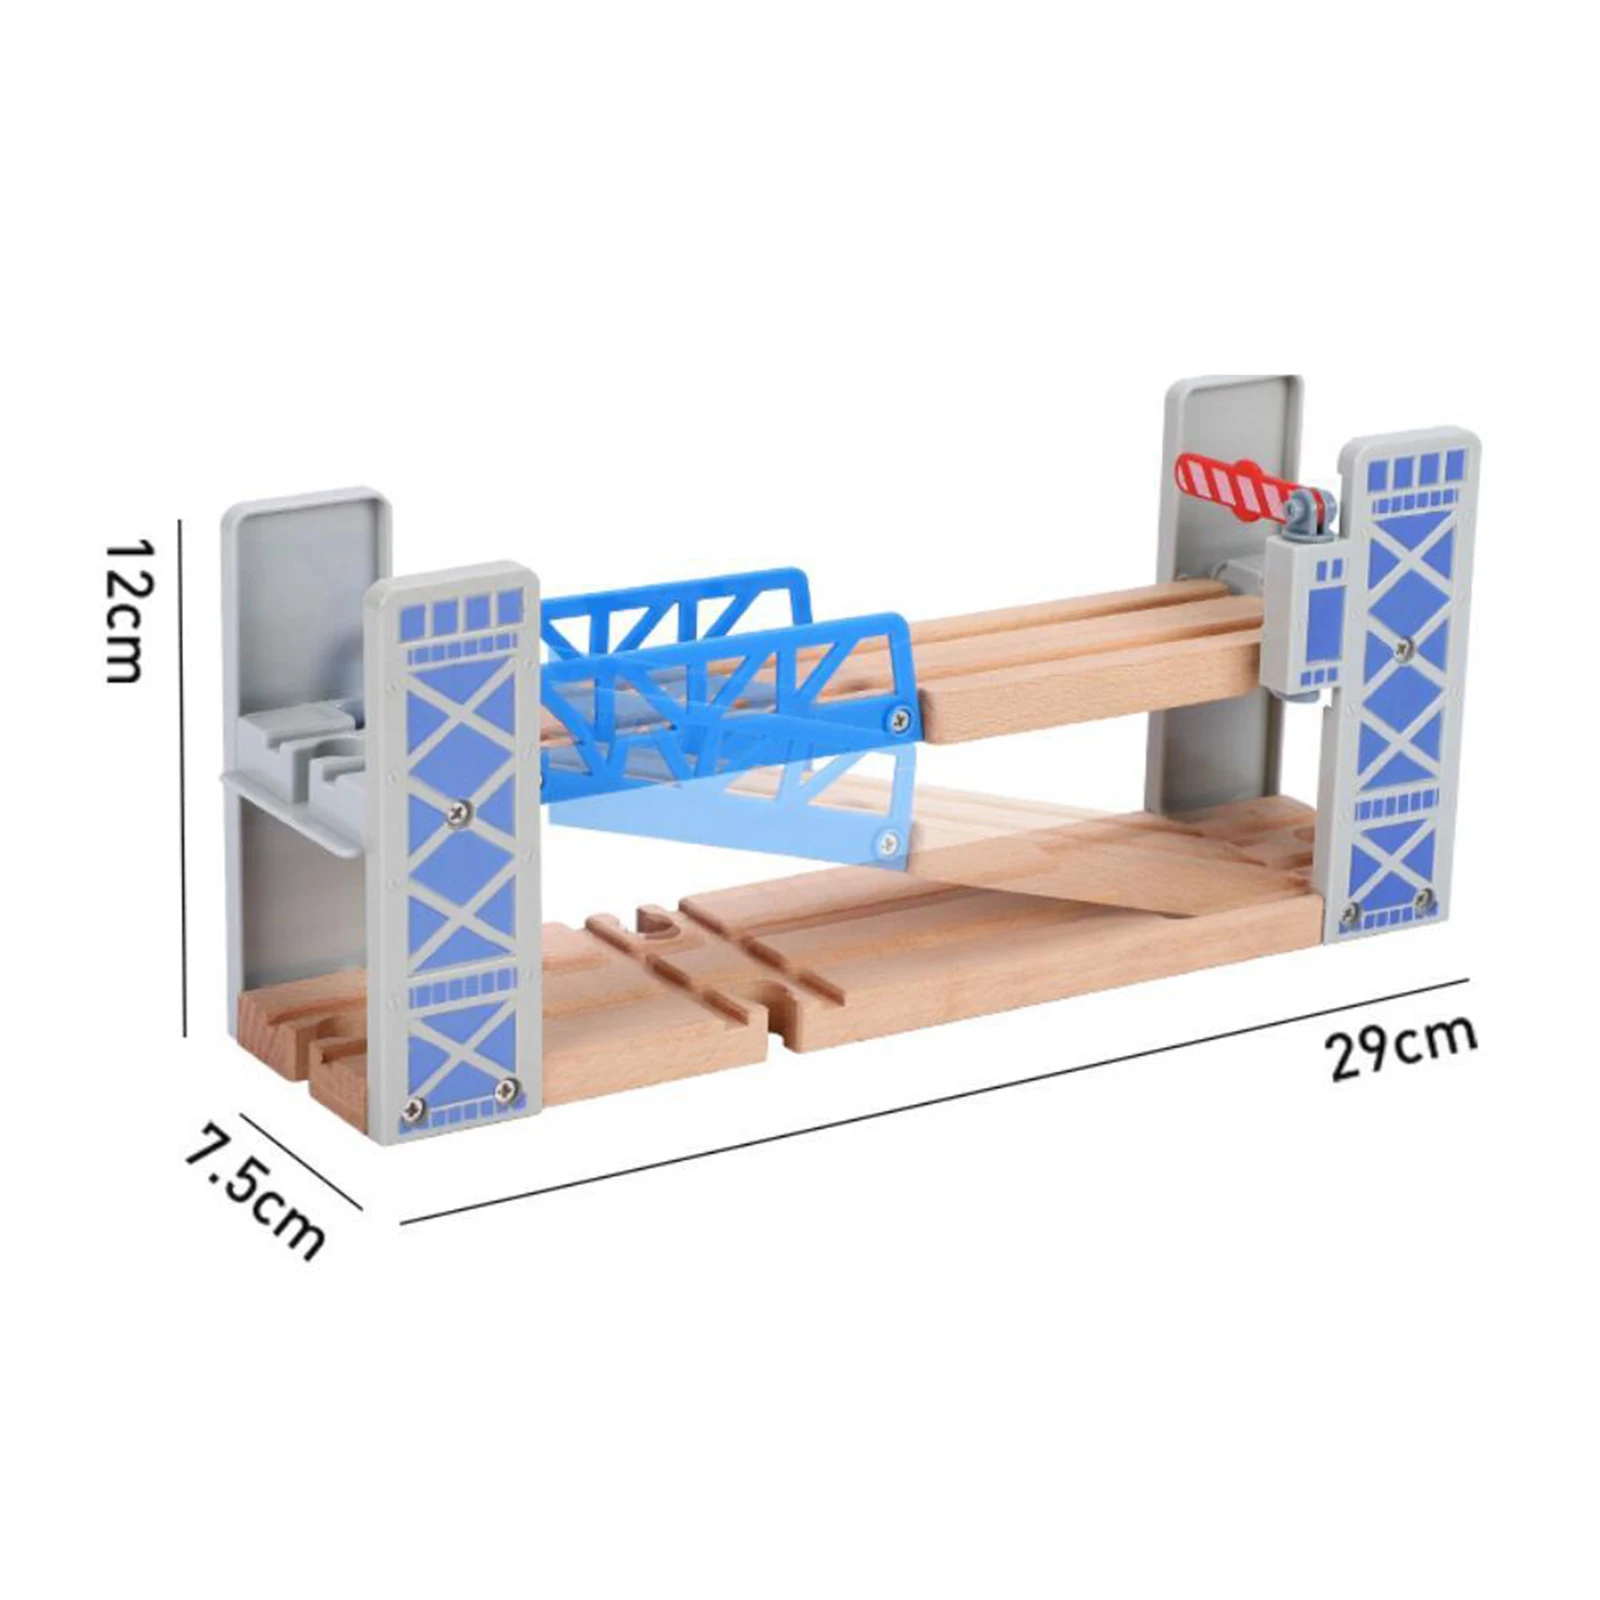 

Wooden Train Track Set - Train Track Bridge Expansion Compatible with All Major Brands Wooden Railway System Track Toys